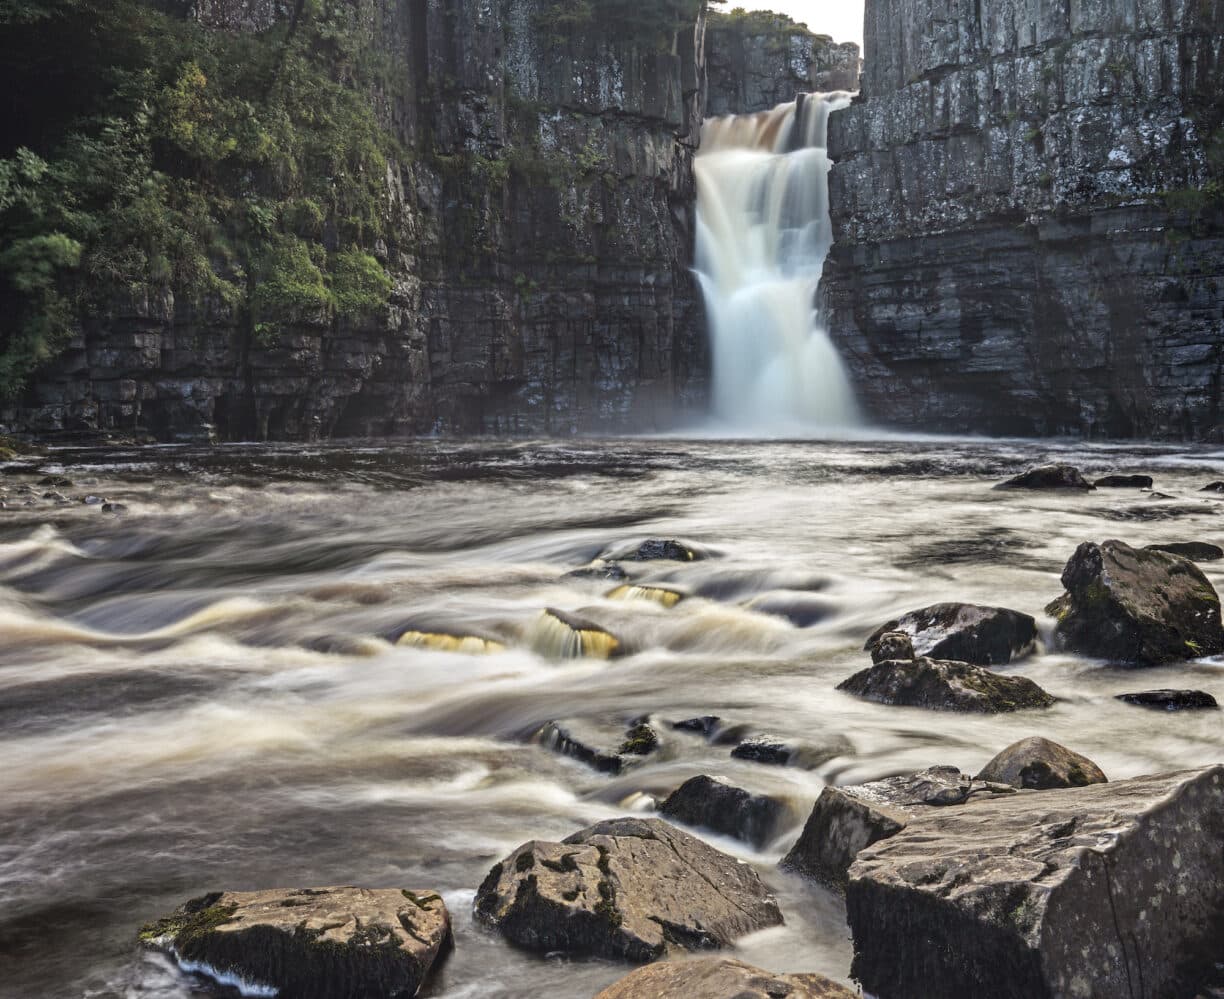 High Force The River Tees Flowing Over High Force Waterfall Upper Teesdale County Durham UK